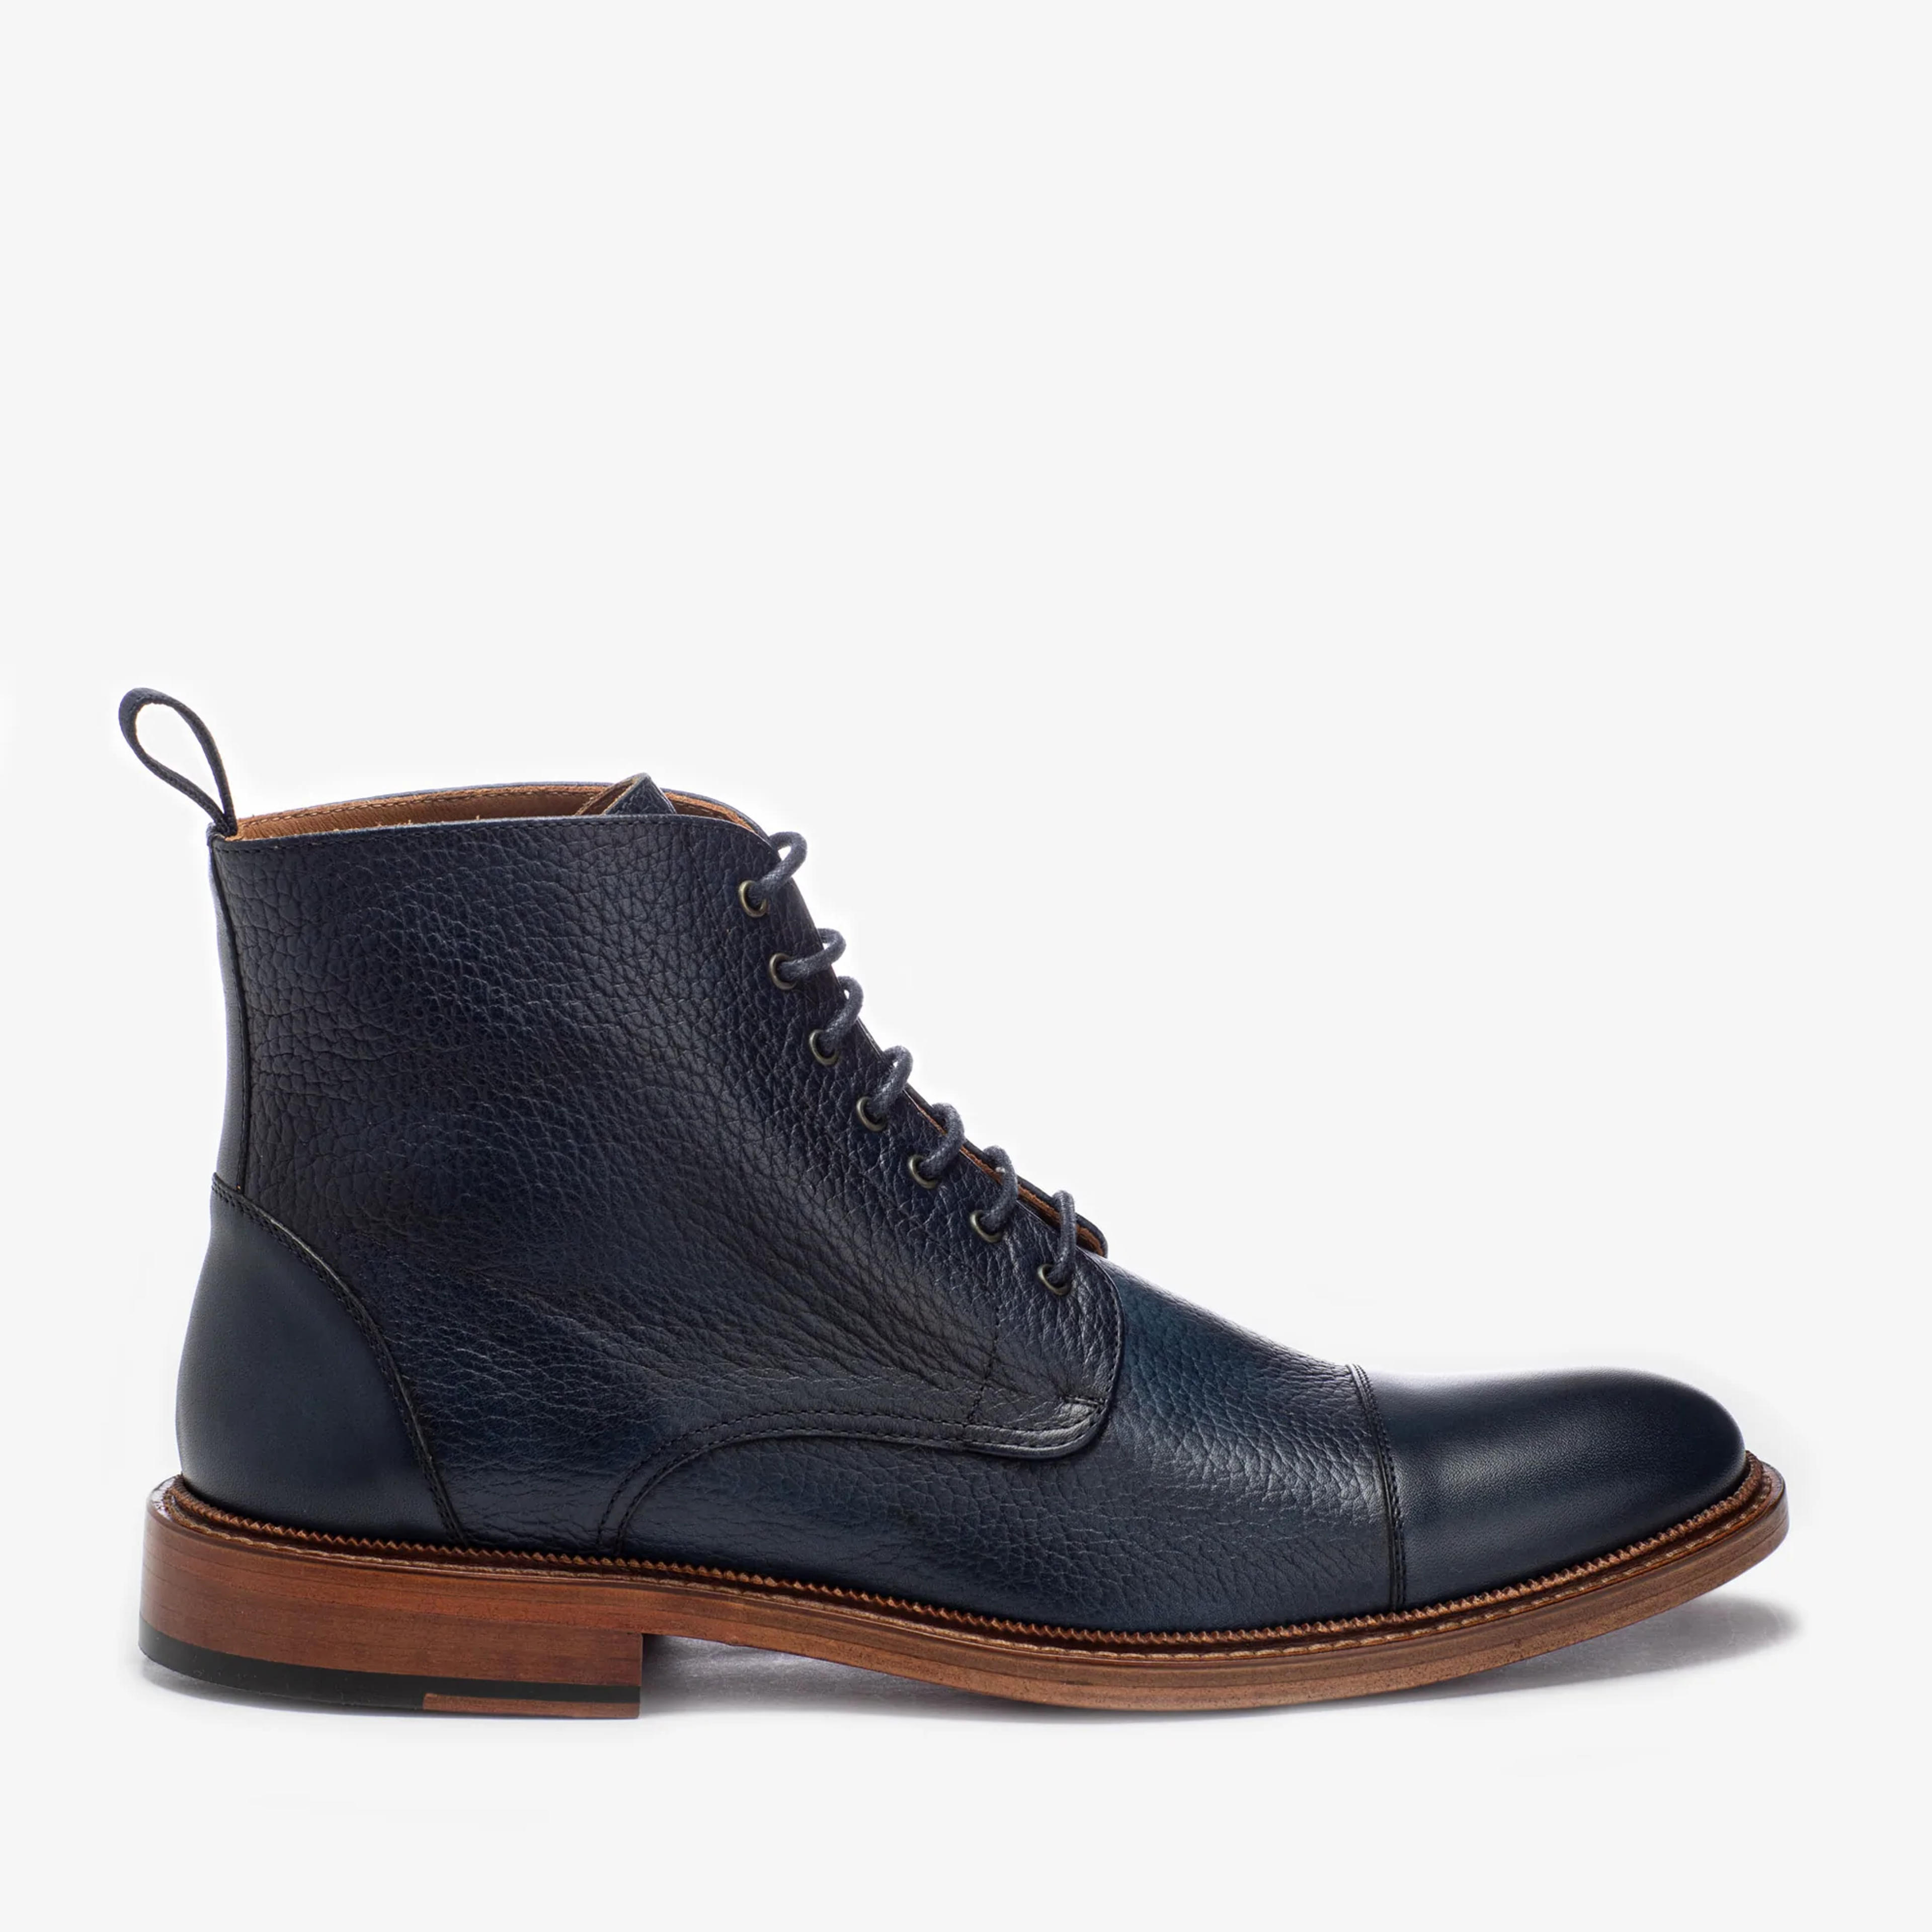 The Rome Boot - Navy Leather Boots | TAFT